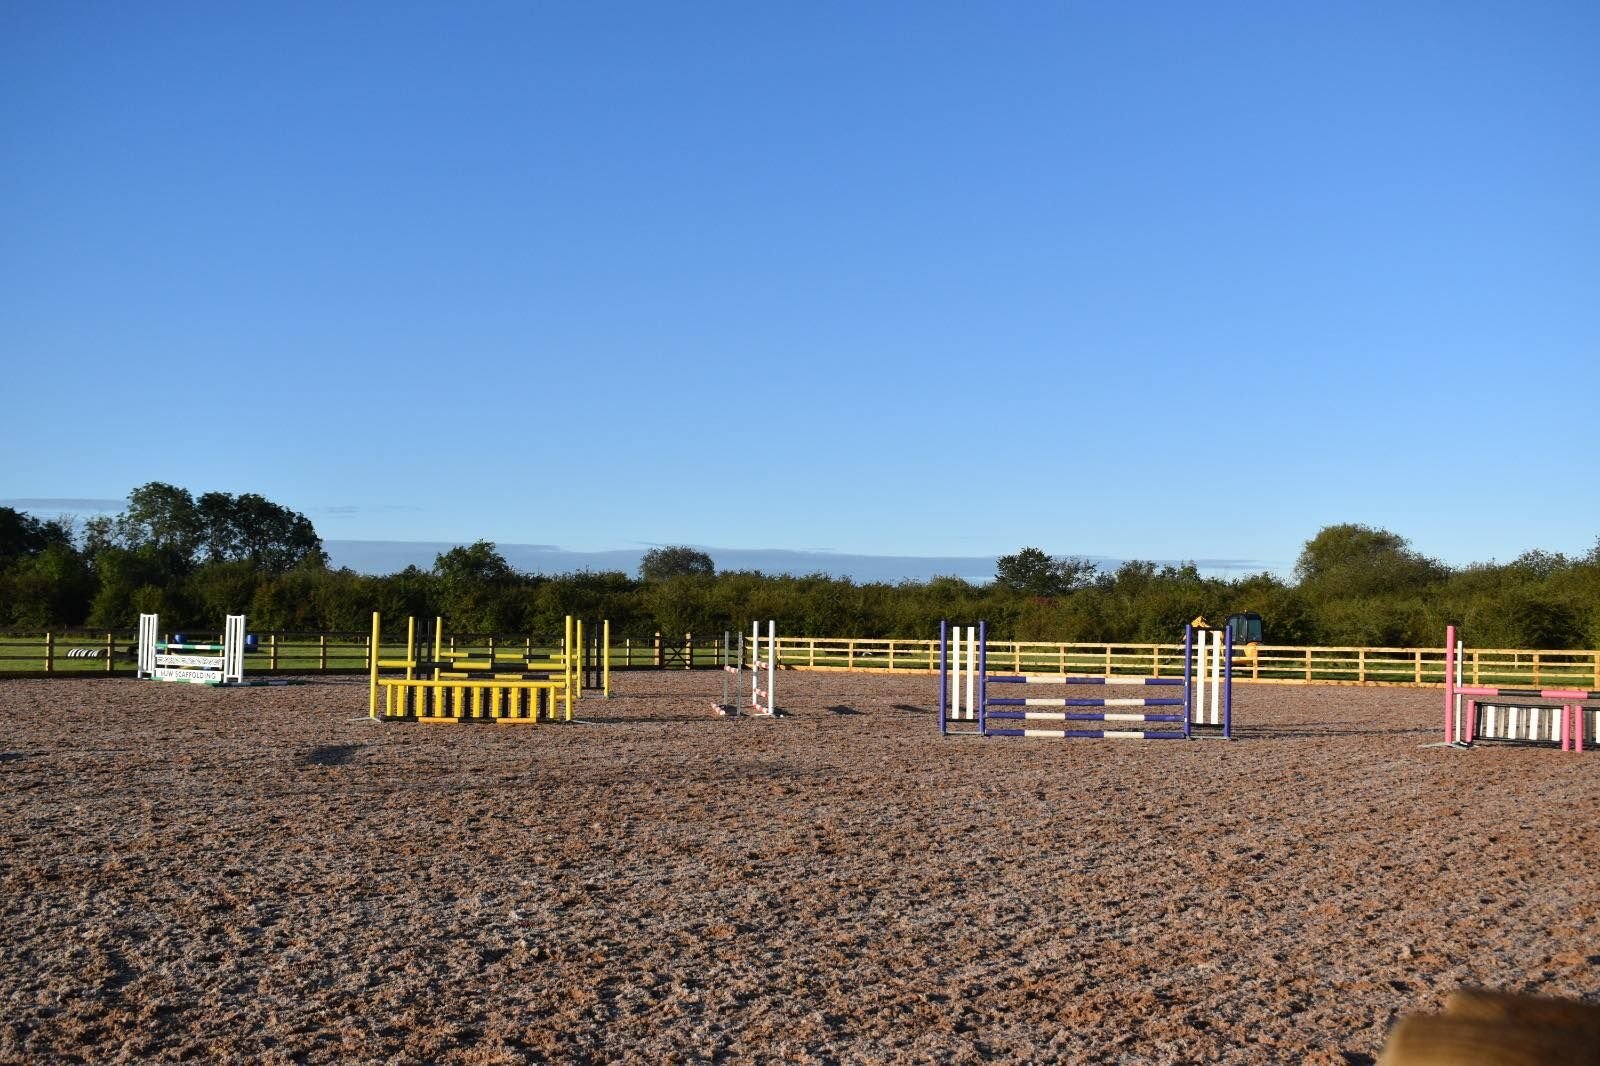 Show jumps at Arkenfield